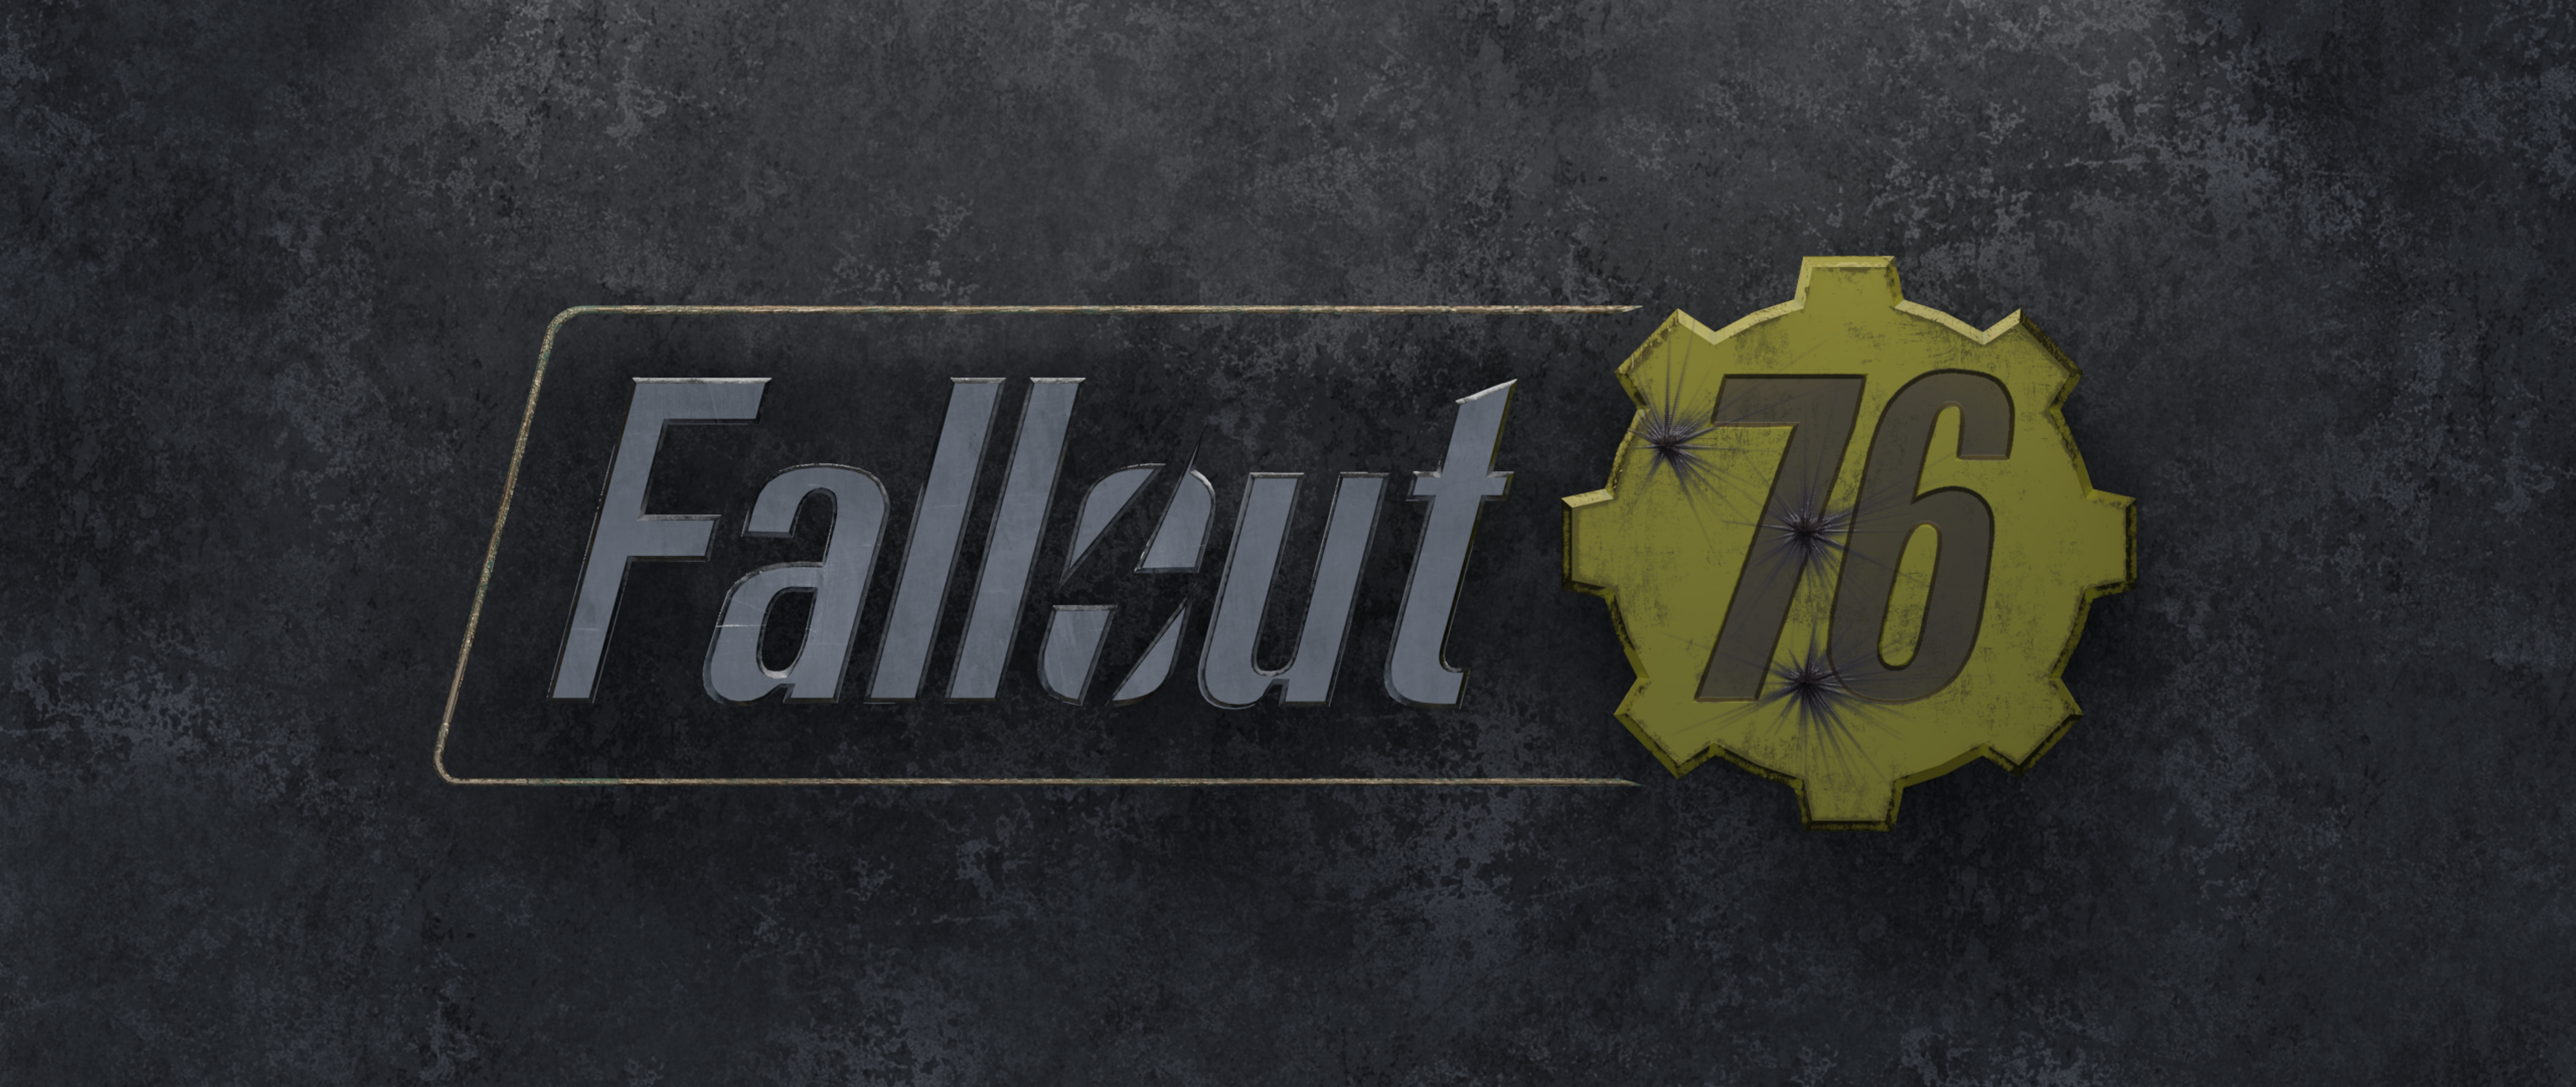 General 5333x2250 Fallout 76 video games Bethesda Softworks title Fallout video game art digital art minimalism simple background